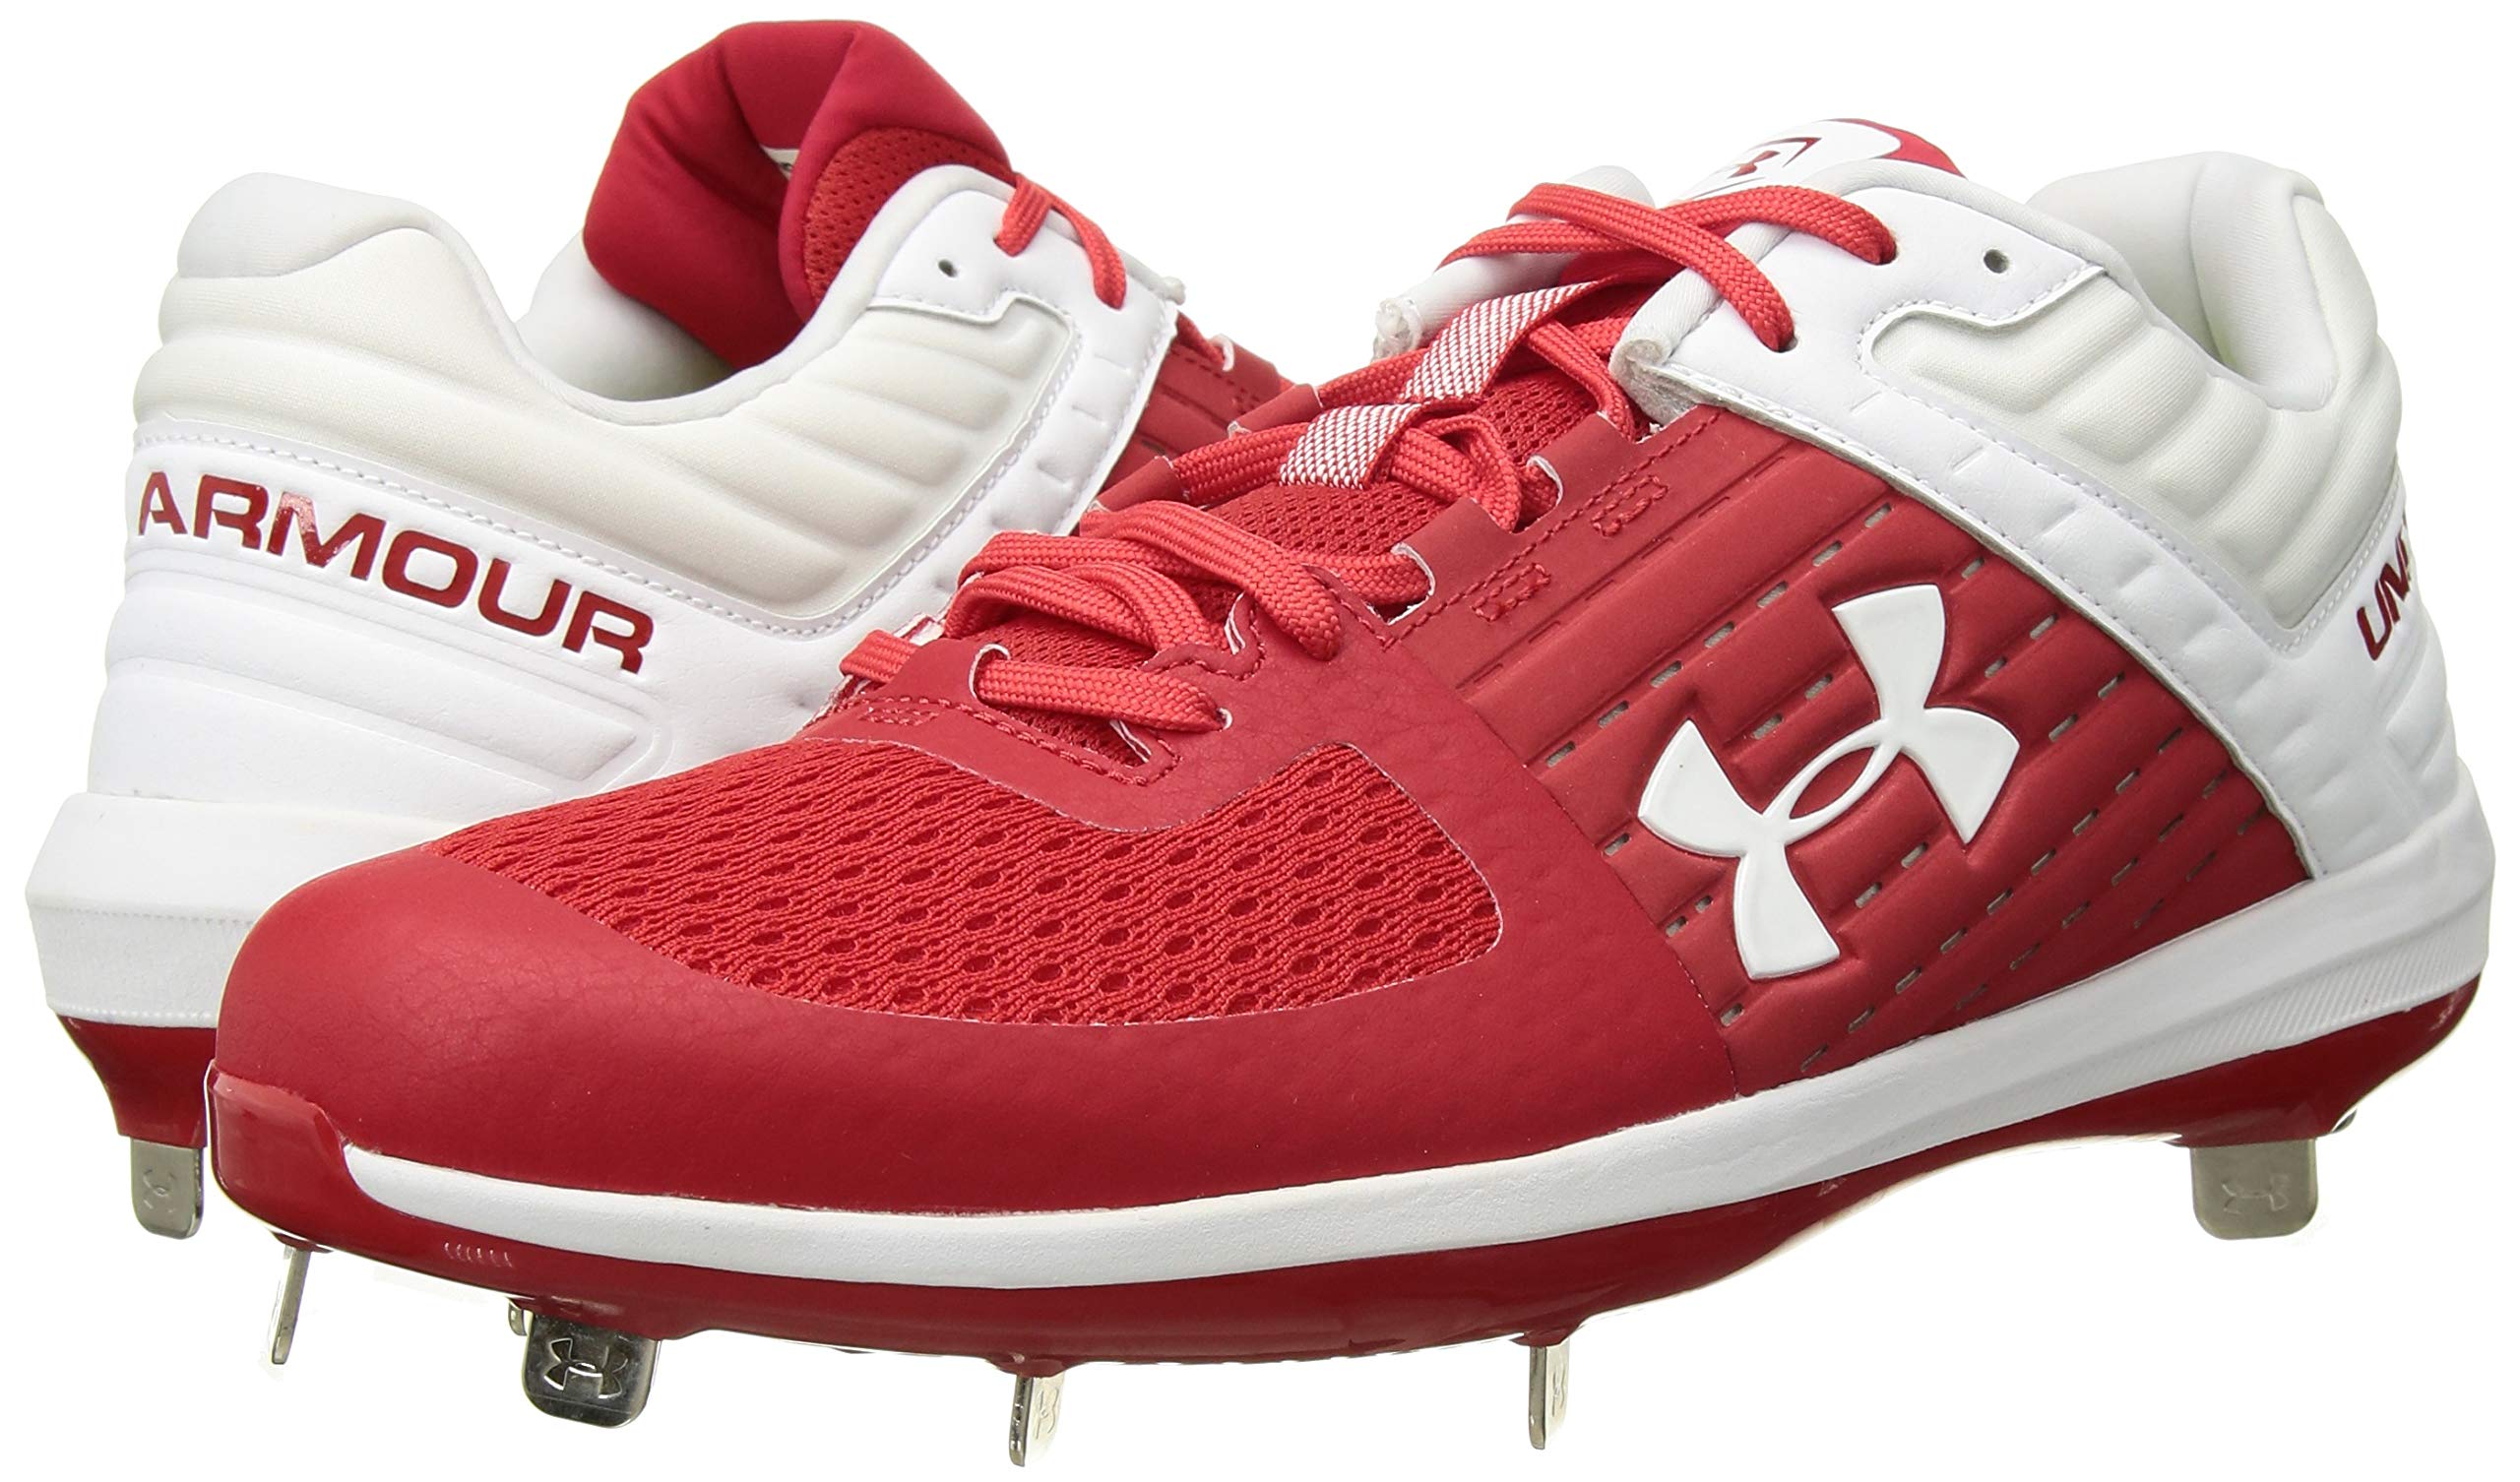 Under Armour Men's Yard Low ST Baseball Shoe, Red (601)/White, 16